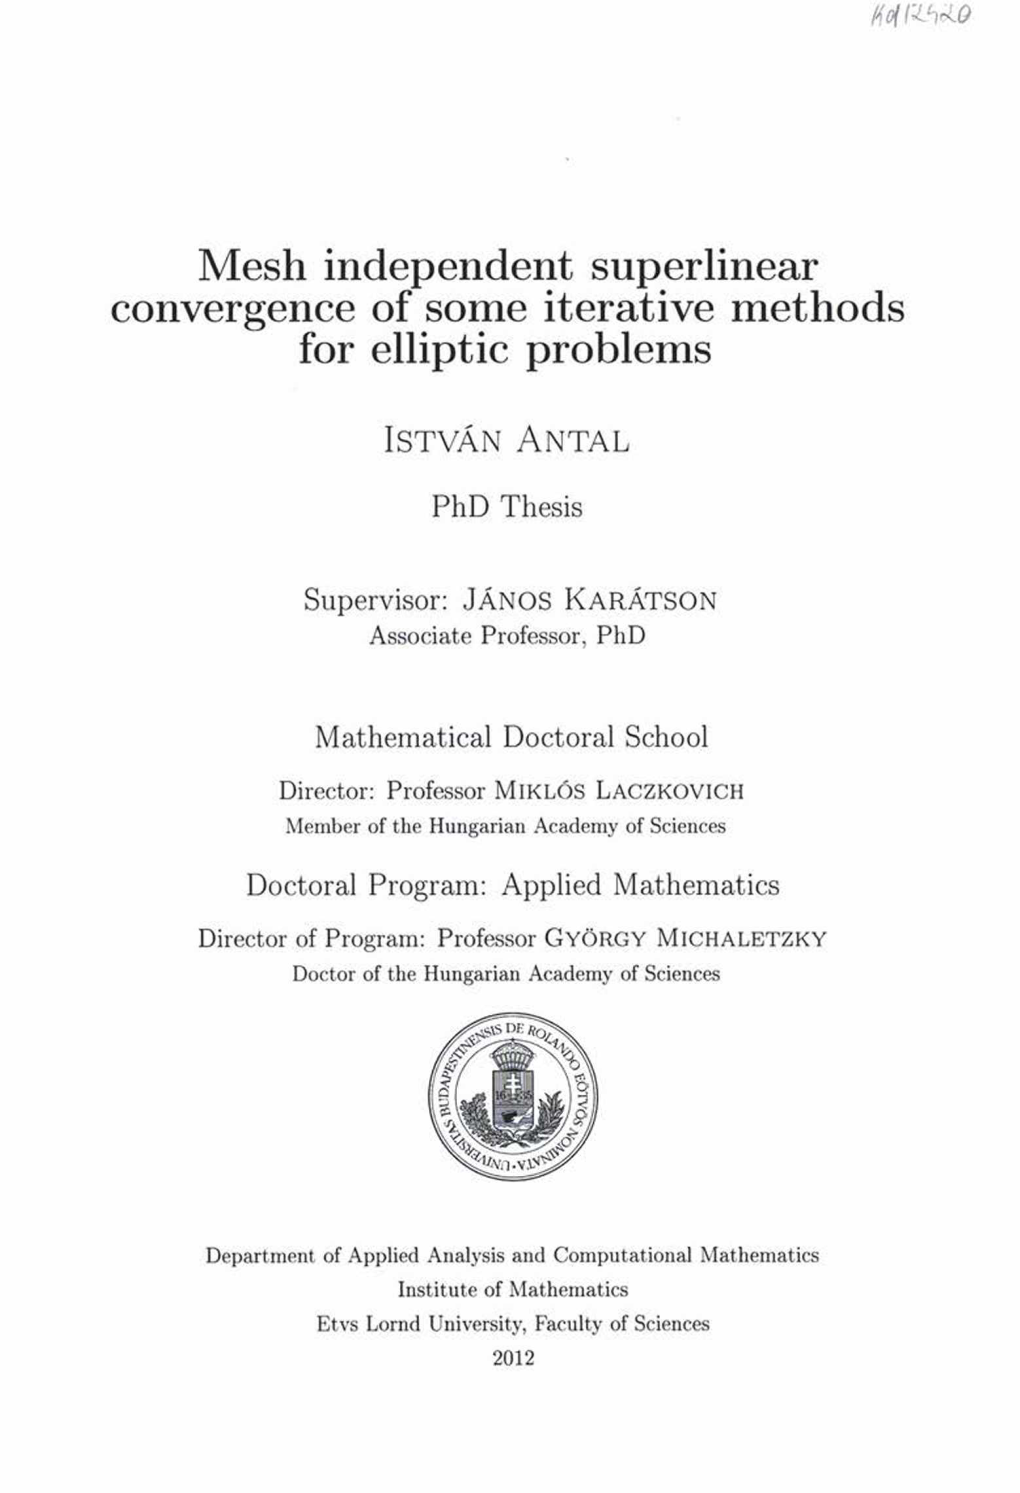 Mesh Independent Superlinear Convergence of Some Iterative Methods for Elliptic Problems